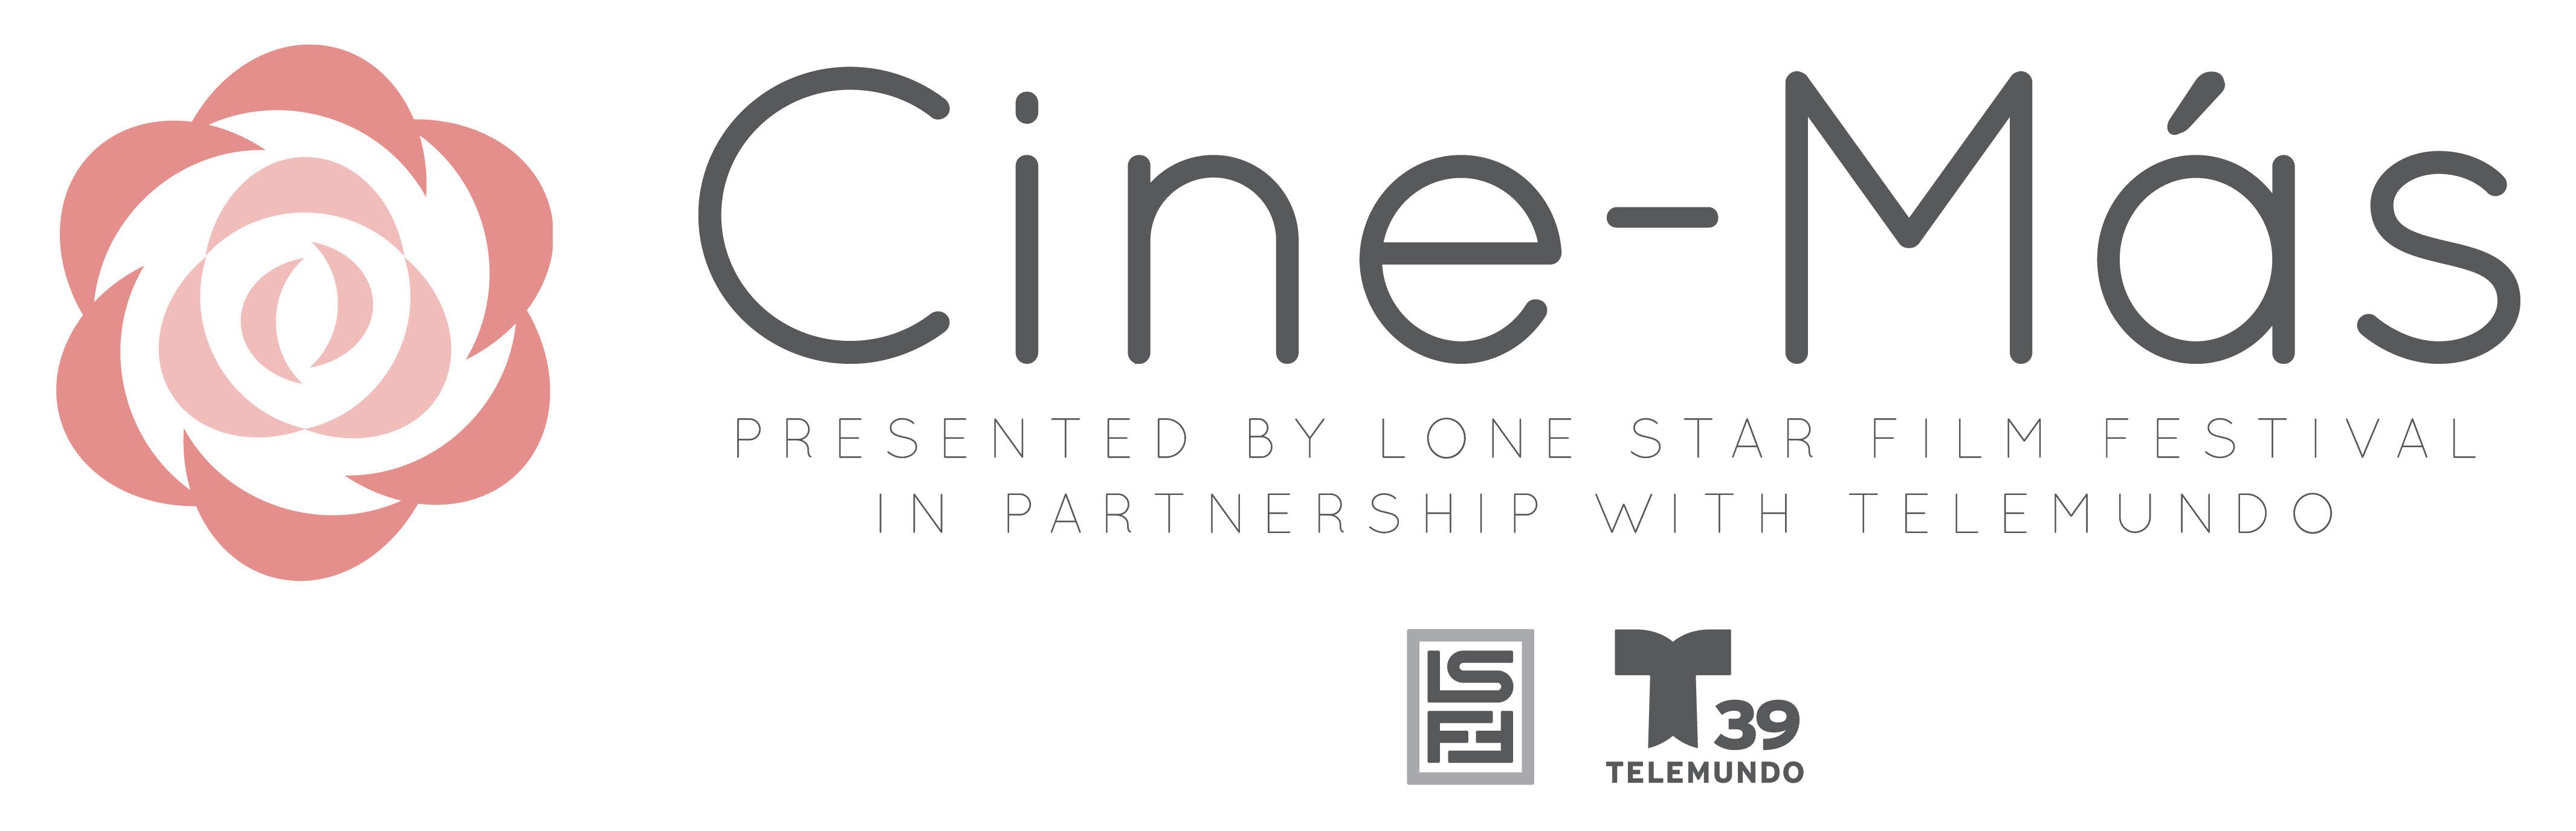 The Lone Star Film Festival celebrates Latin cinema with a new initiative called Cine-Más! This new portion of the festival features films that share the art and cultures of the Latin and Hispanic people. Photo: Cine-Más logo